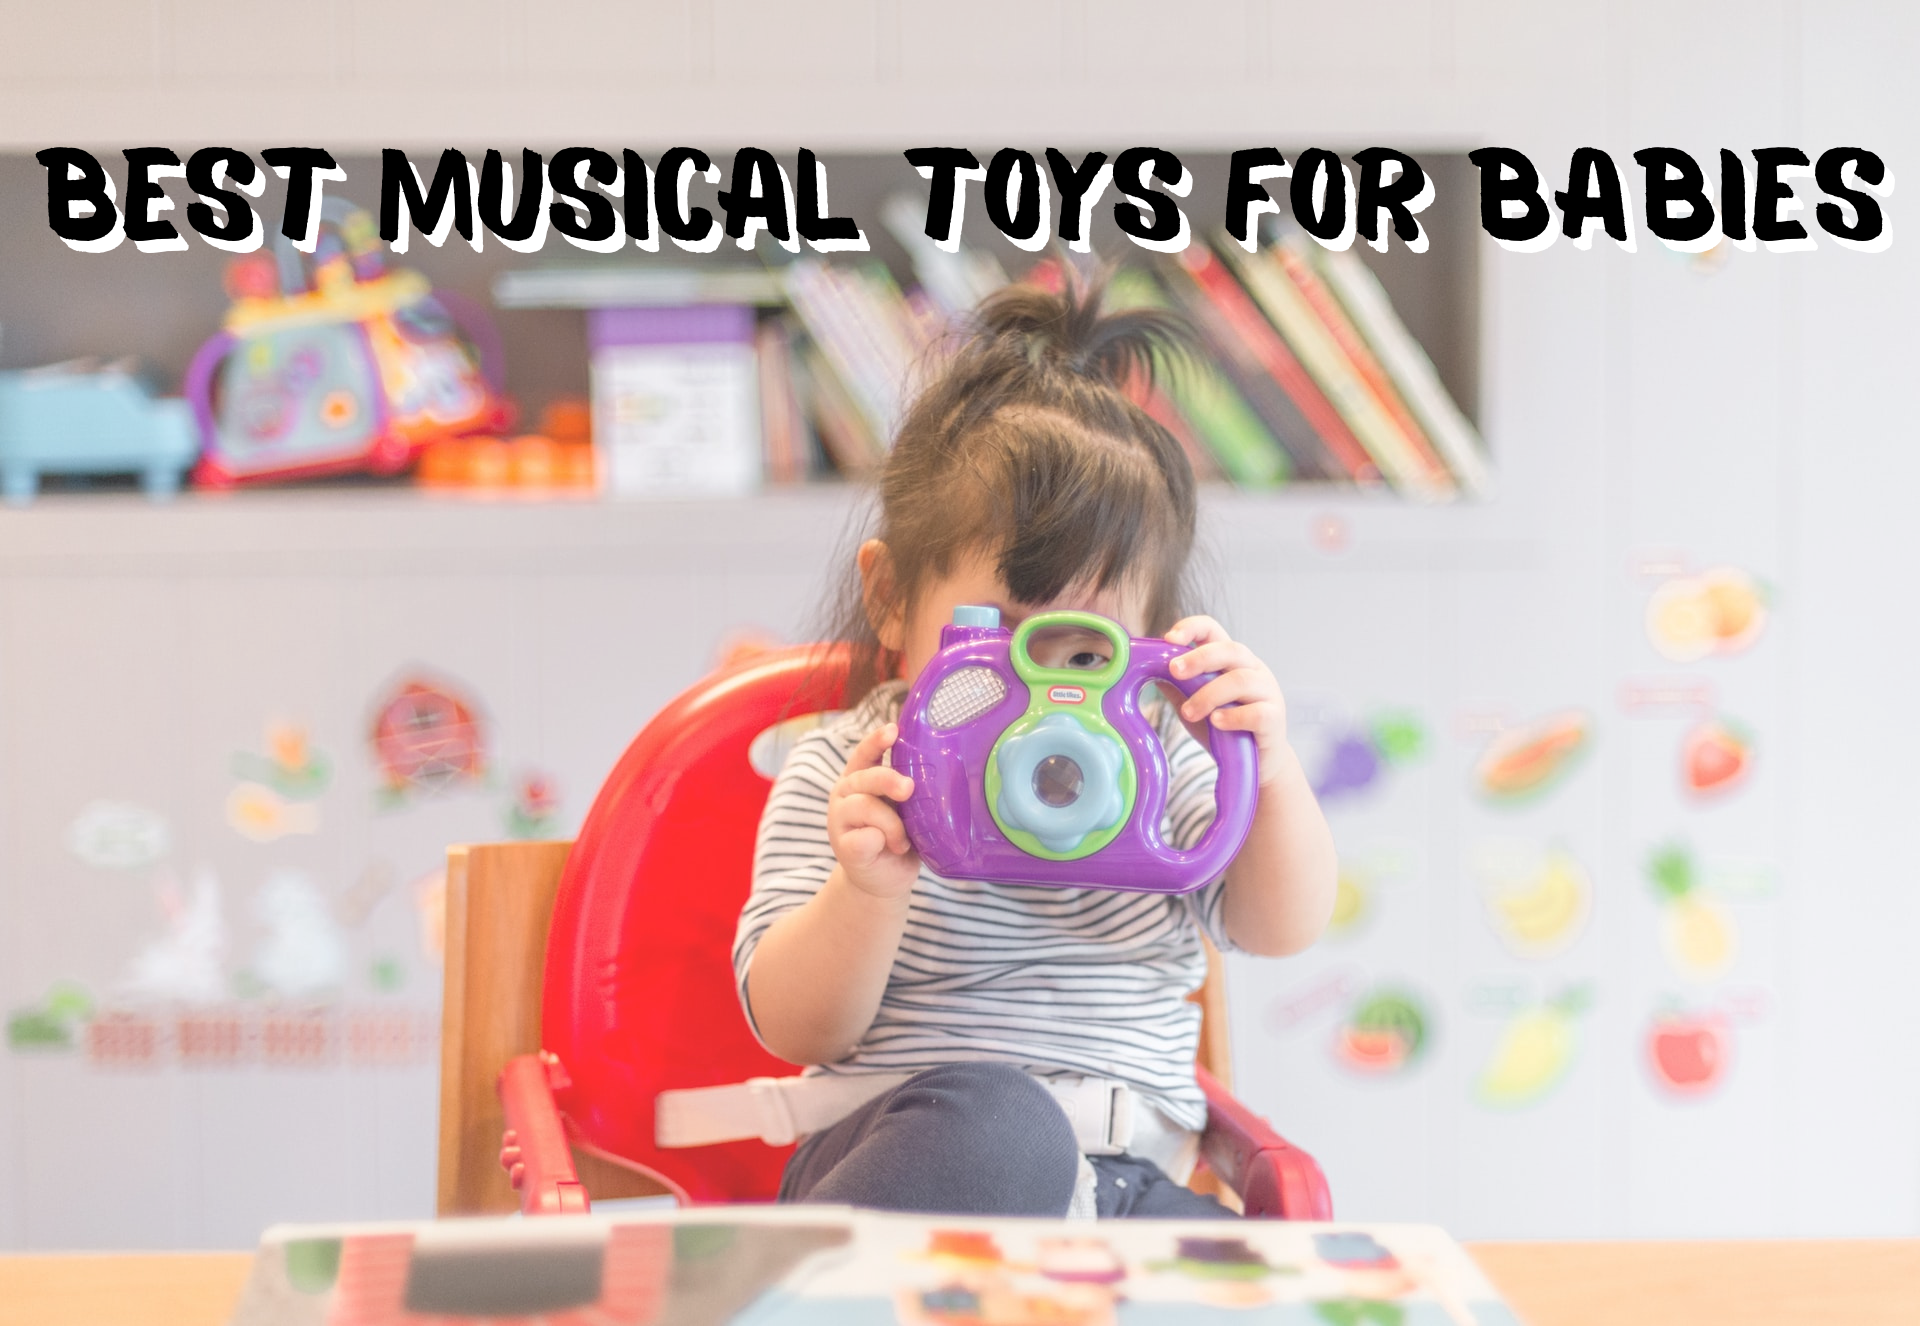 BEST MUSICAL TOYS FOR BABIES